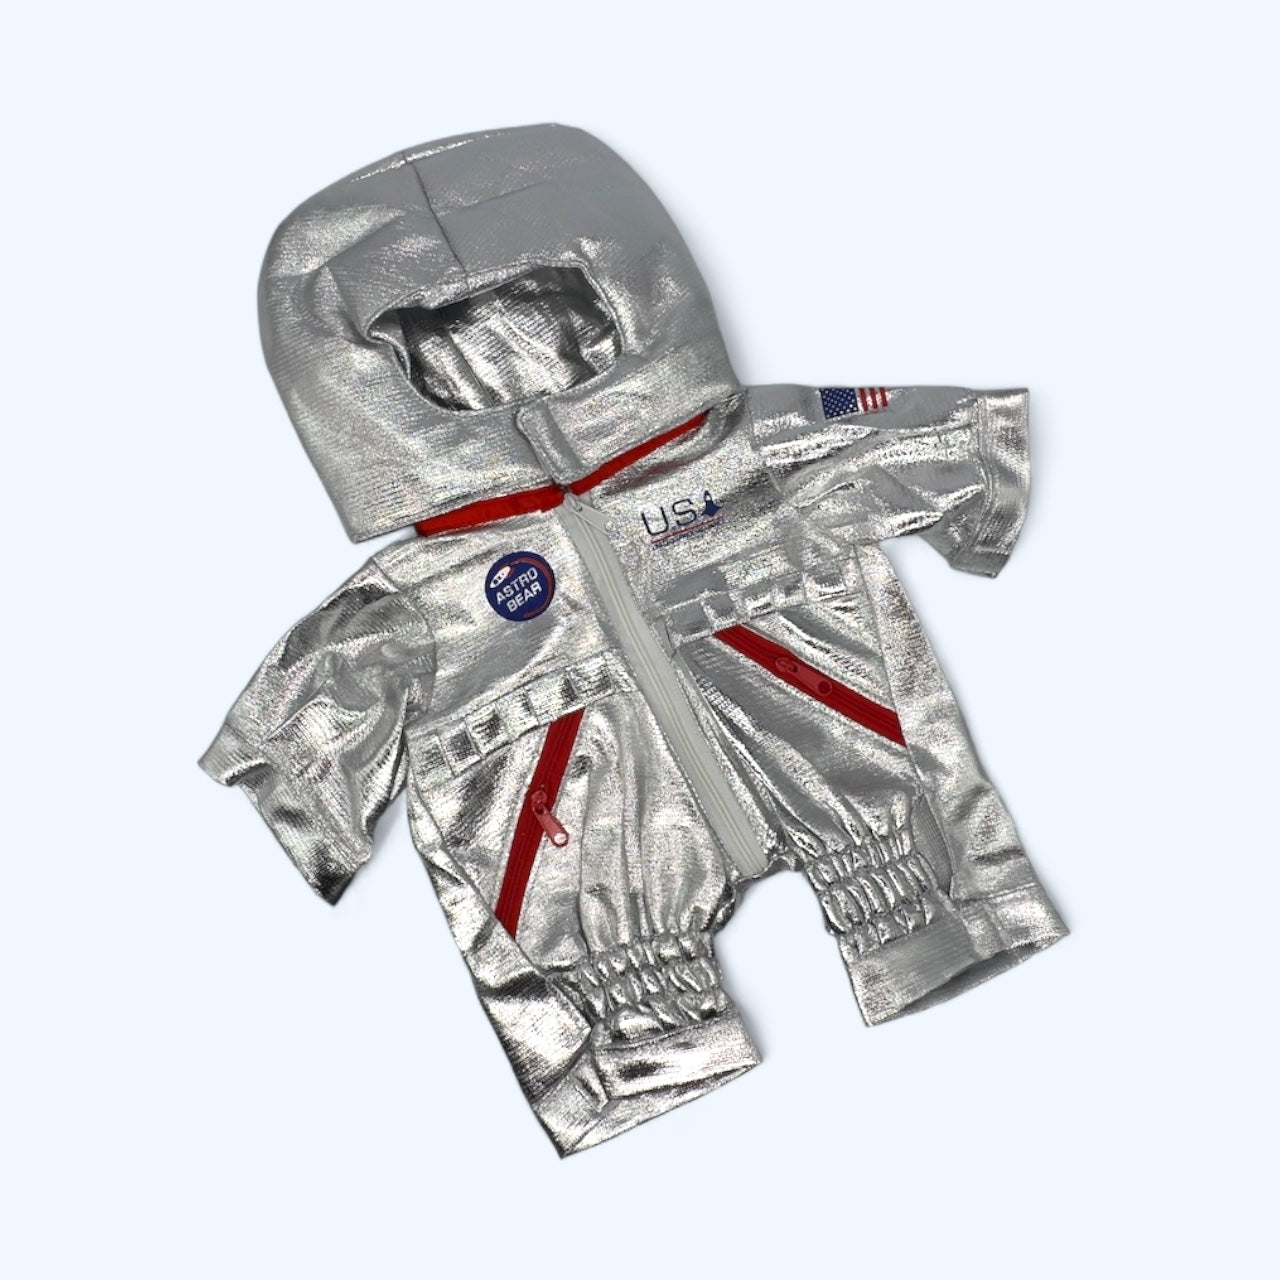 Astro Bear Outfit